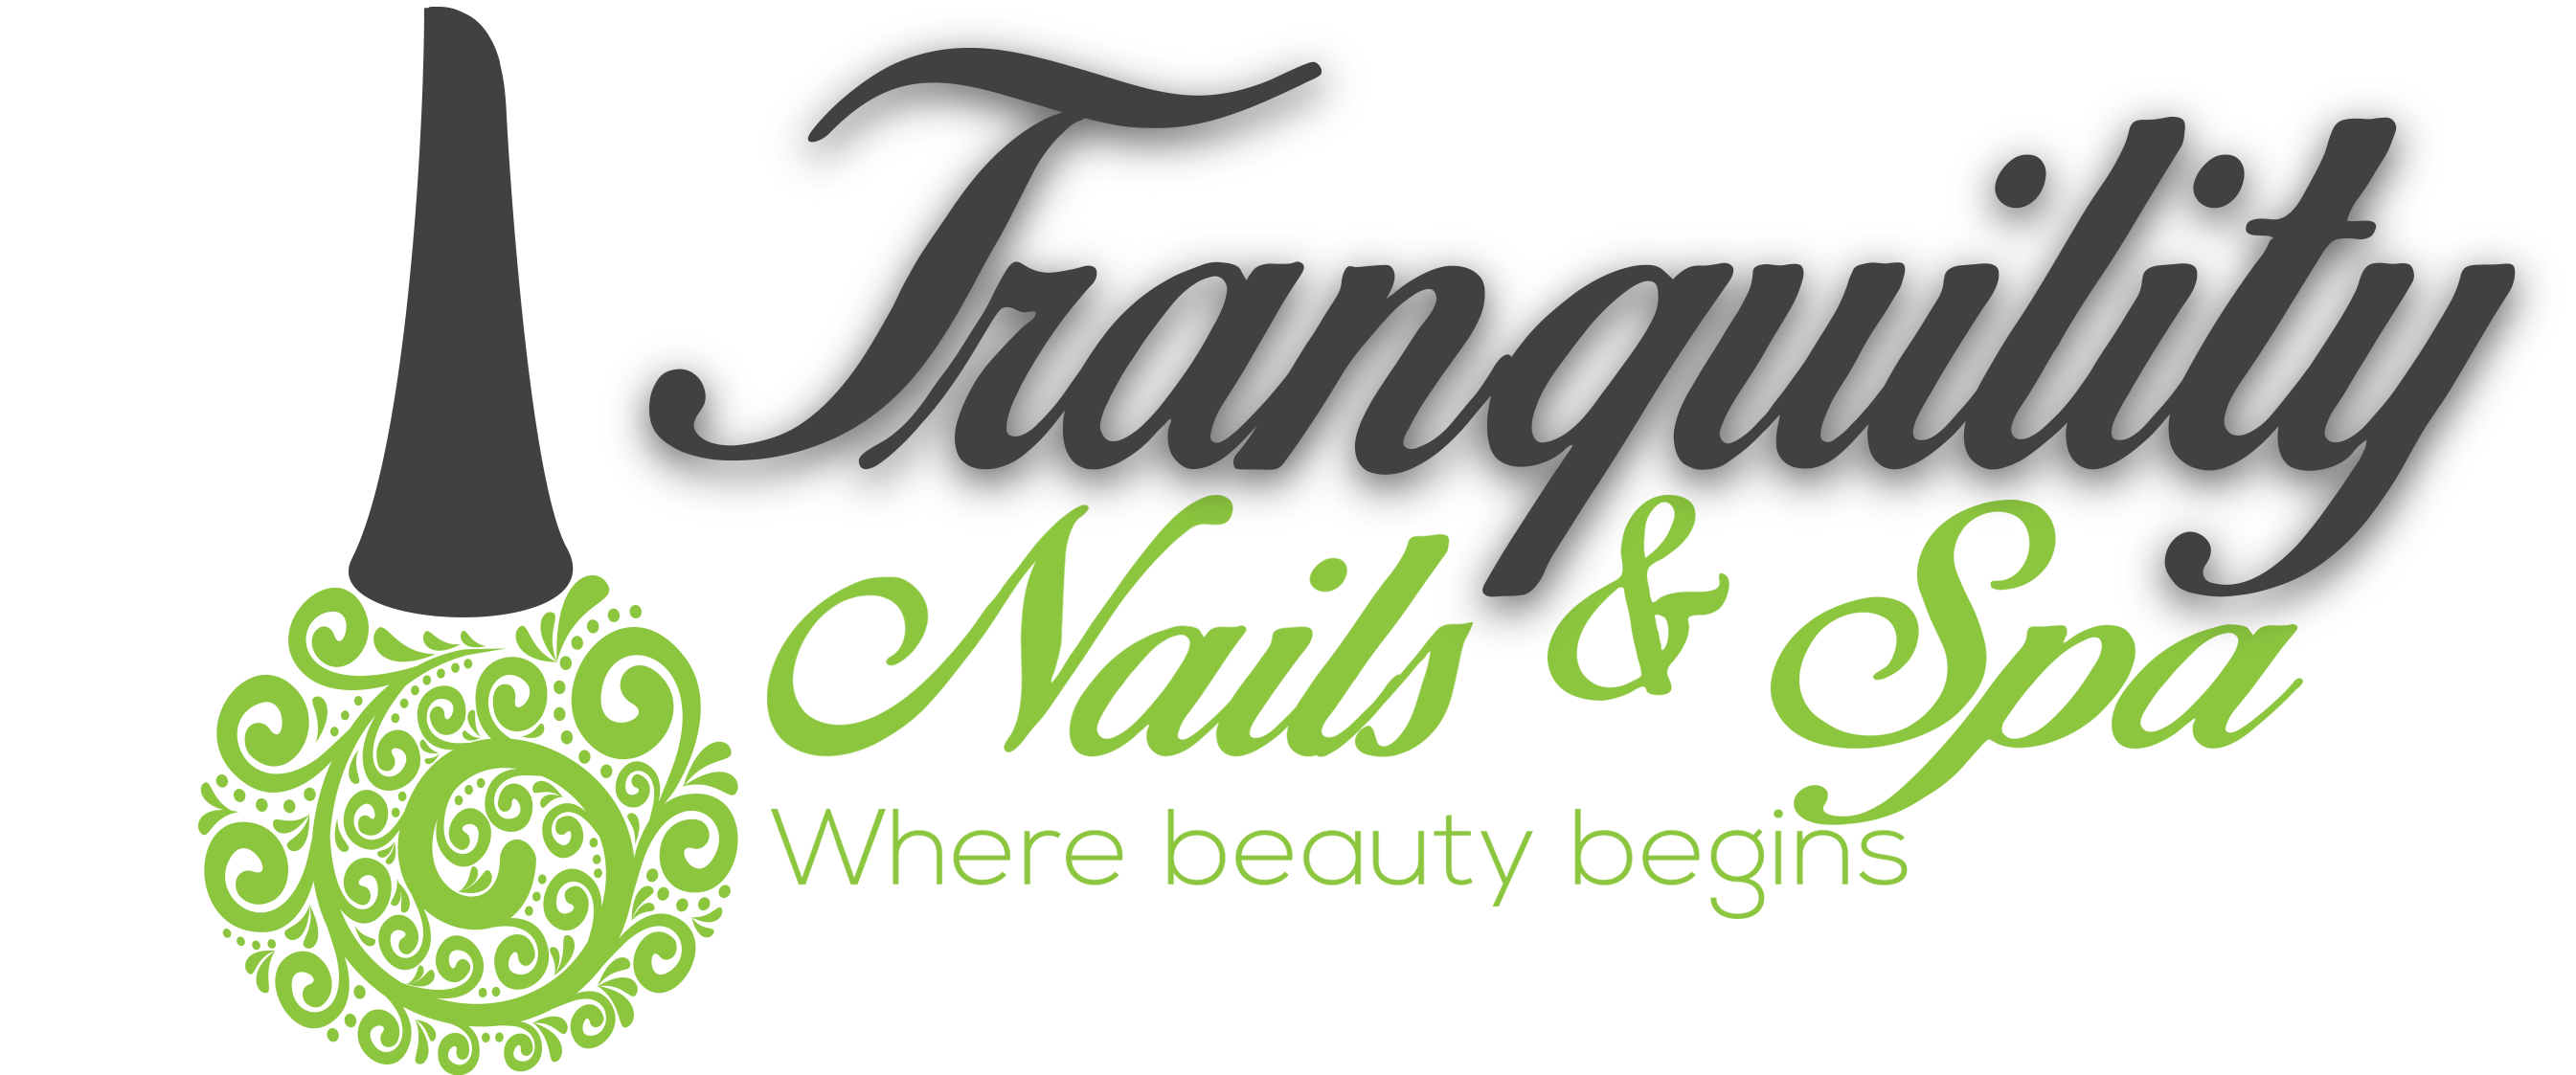 Provide best nails services in Bellevue, WA